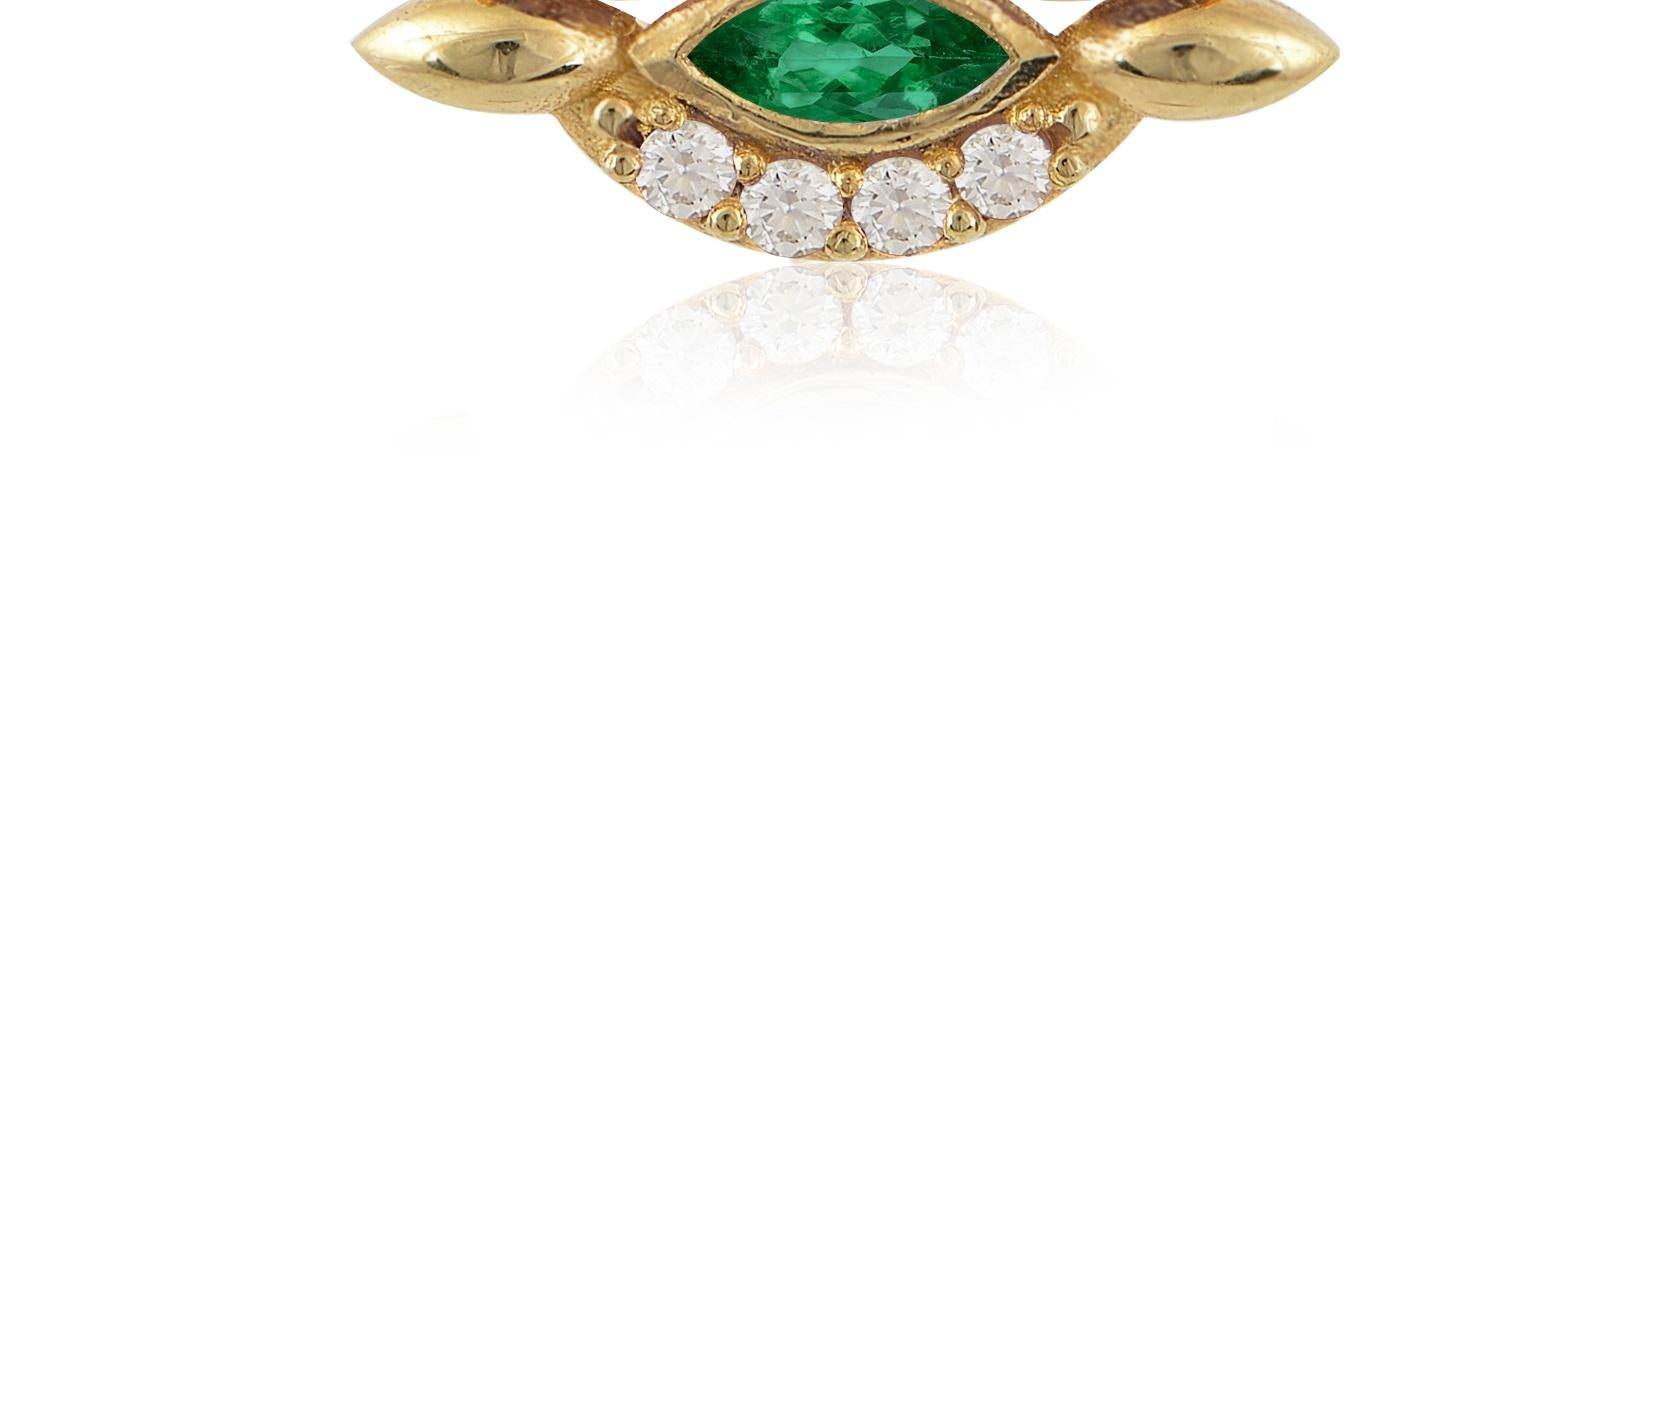 Contemporary Eye Pendant in 18 Karat Yellow Gold With Diamonds And An Emerald For Sale